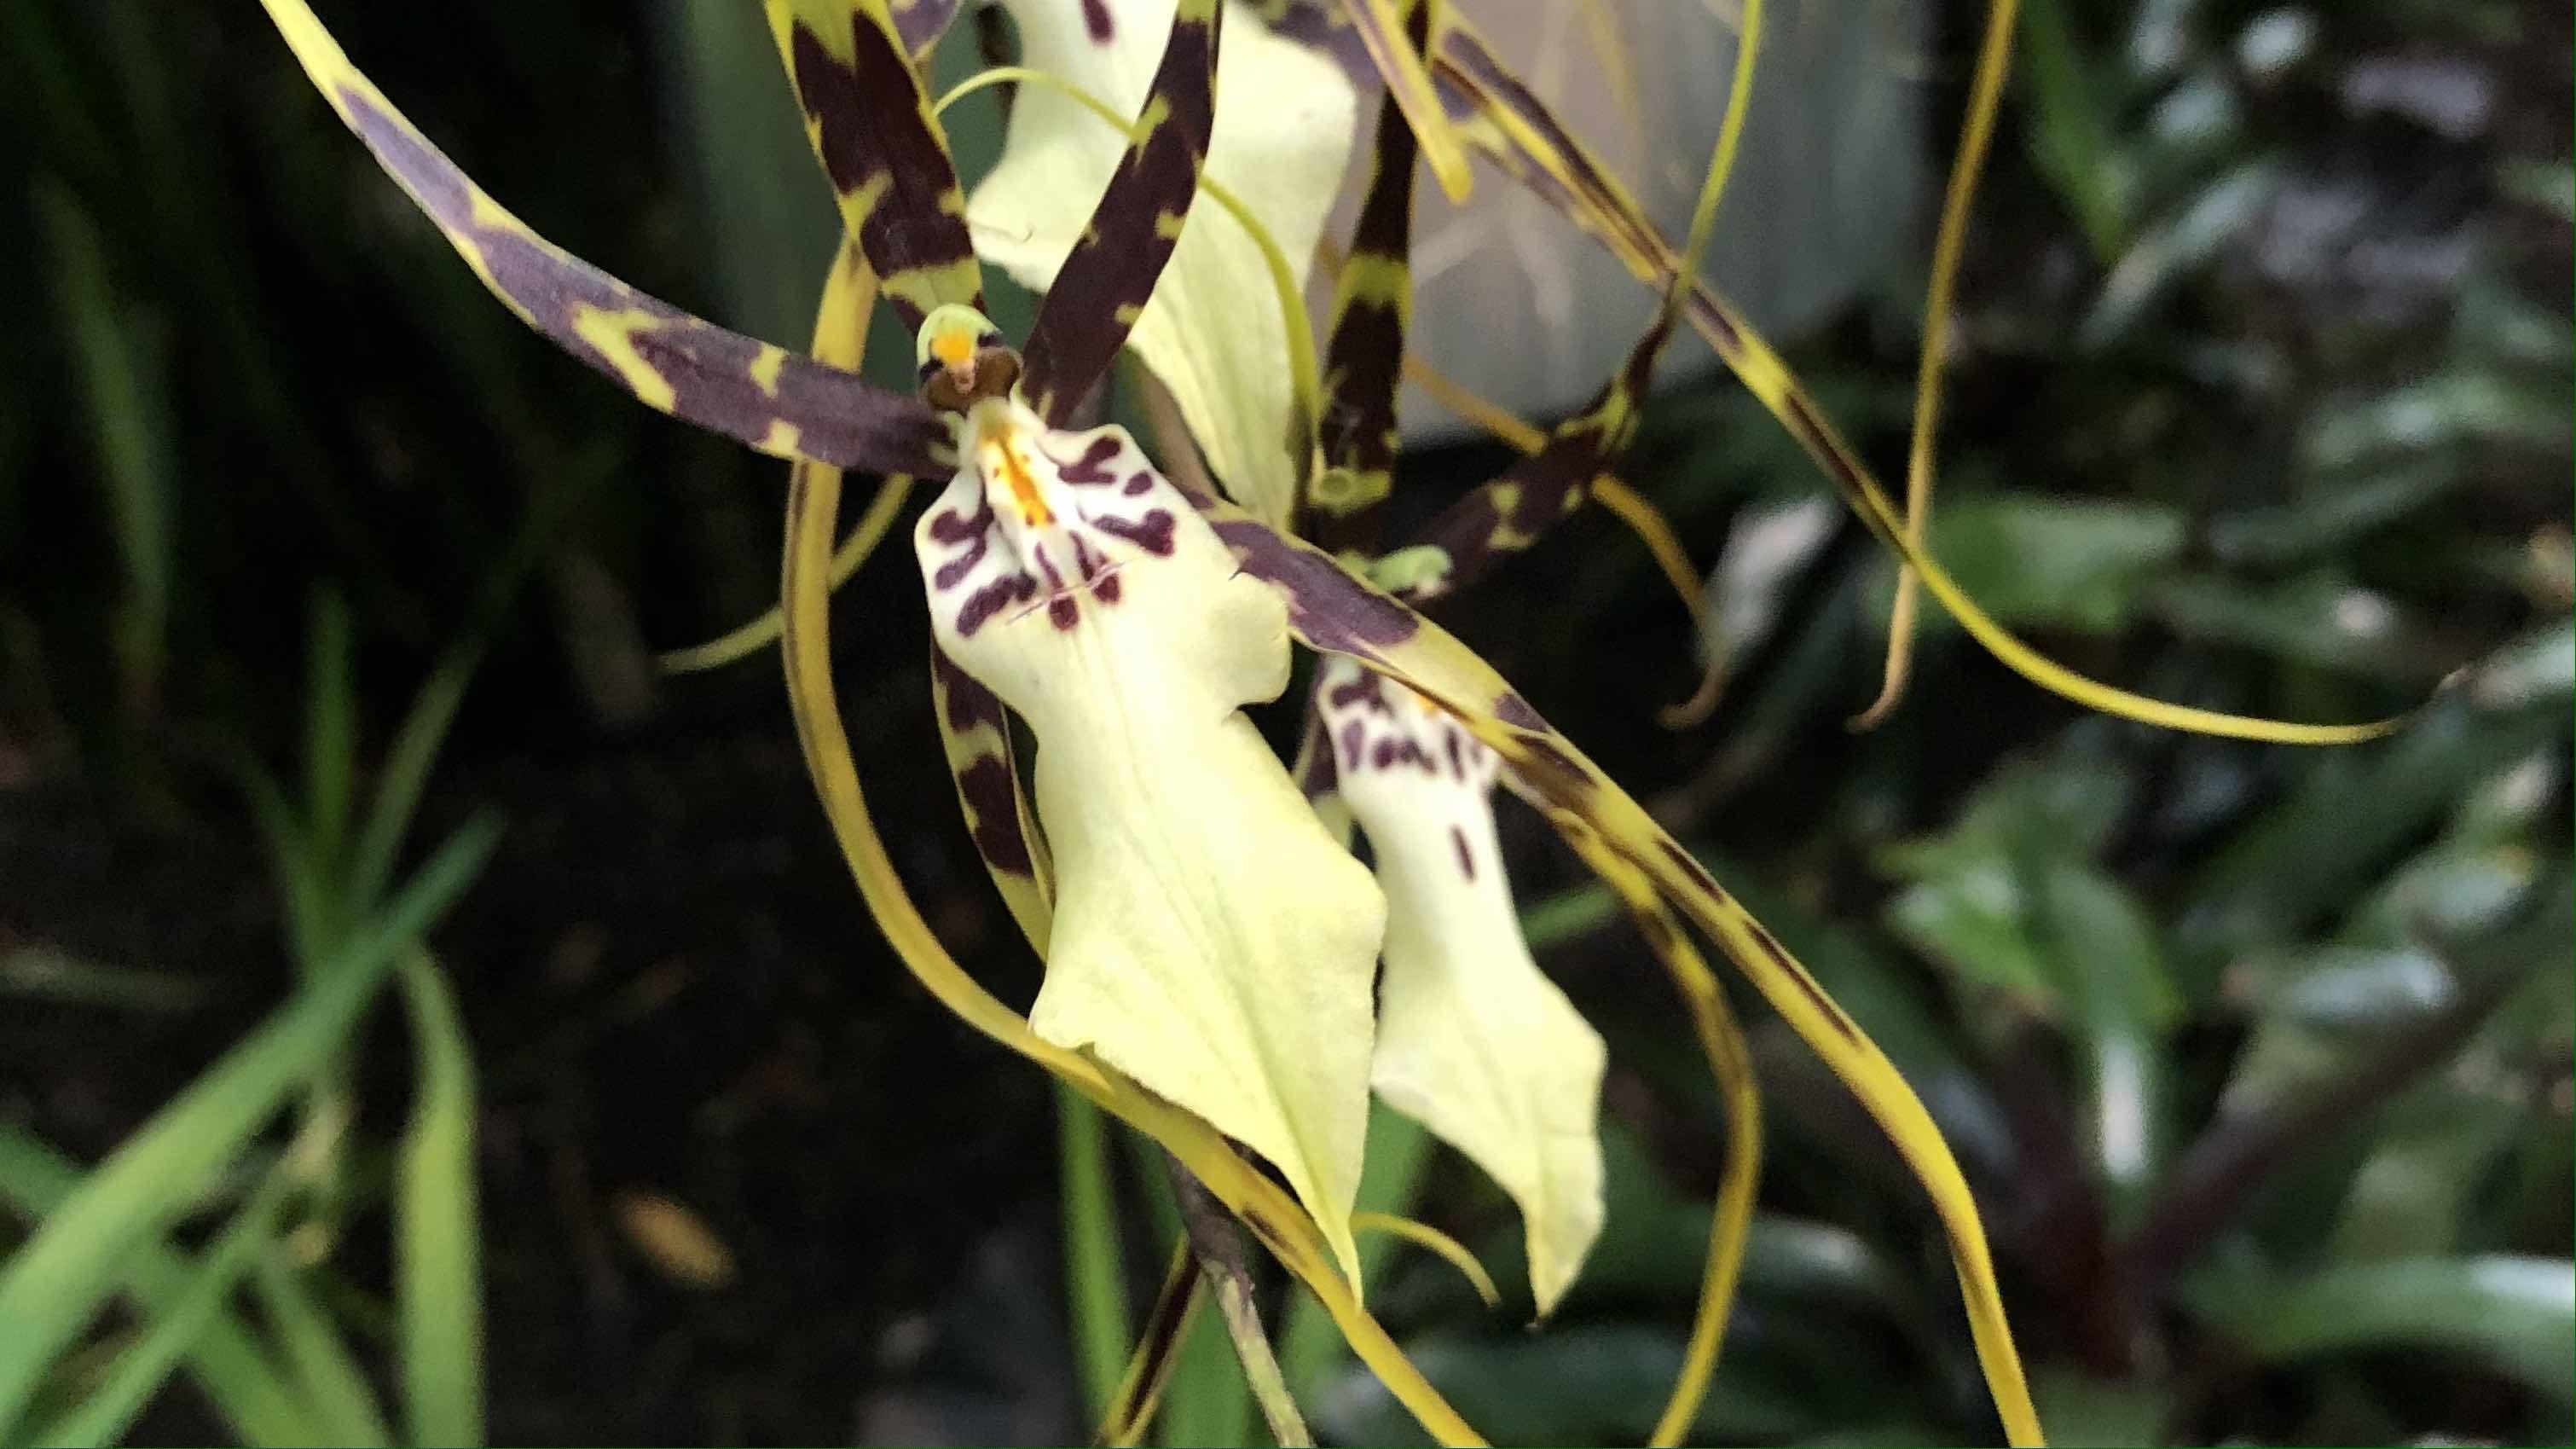 Seen one orchid, you haven't come close to seeing them all. It's one of the most diverse groups of plants. (Patty Wetli / WTTW News)